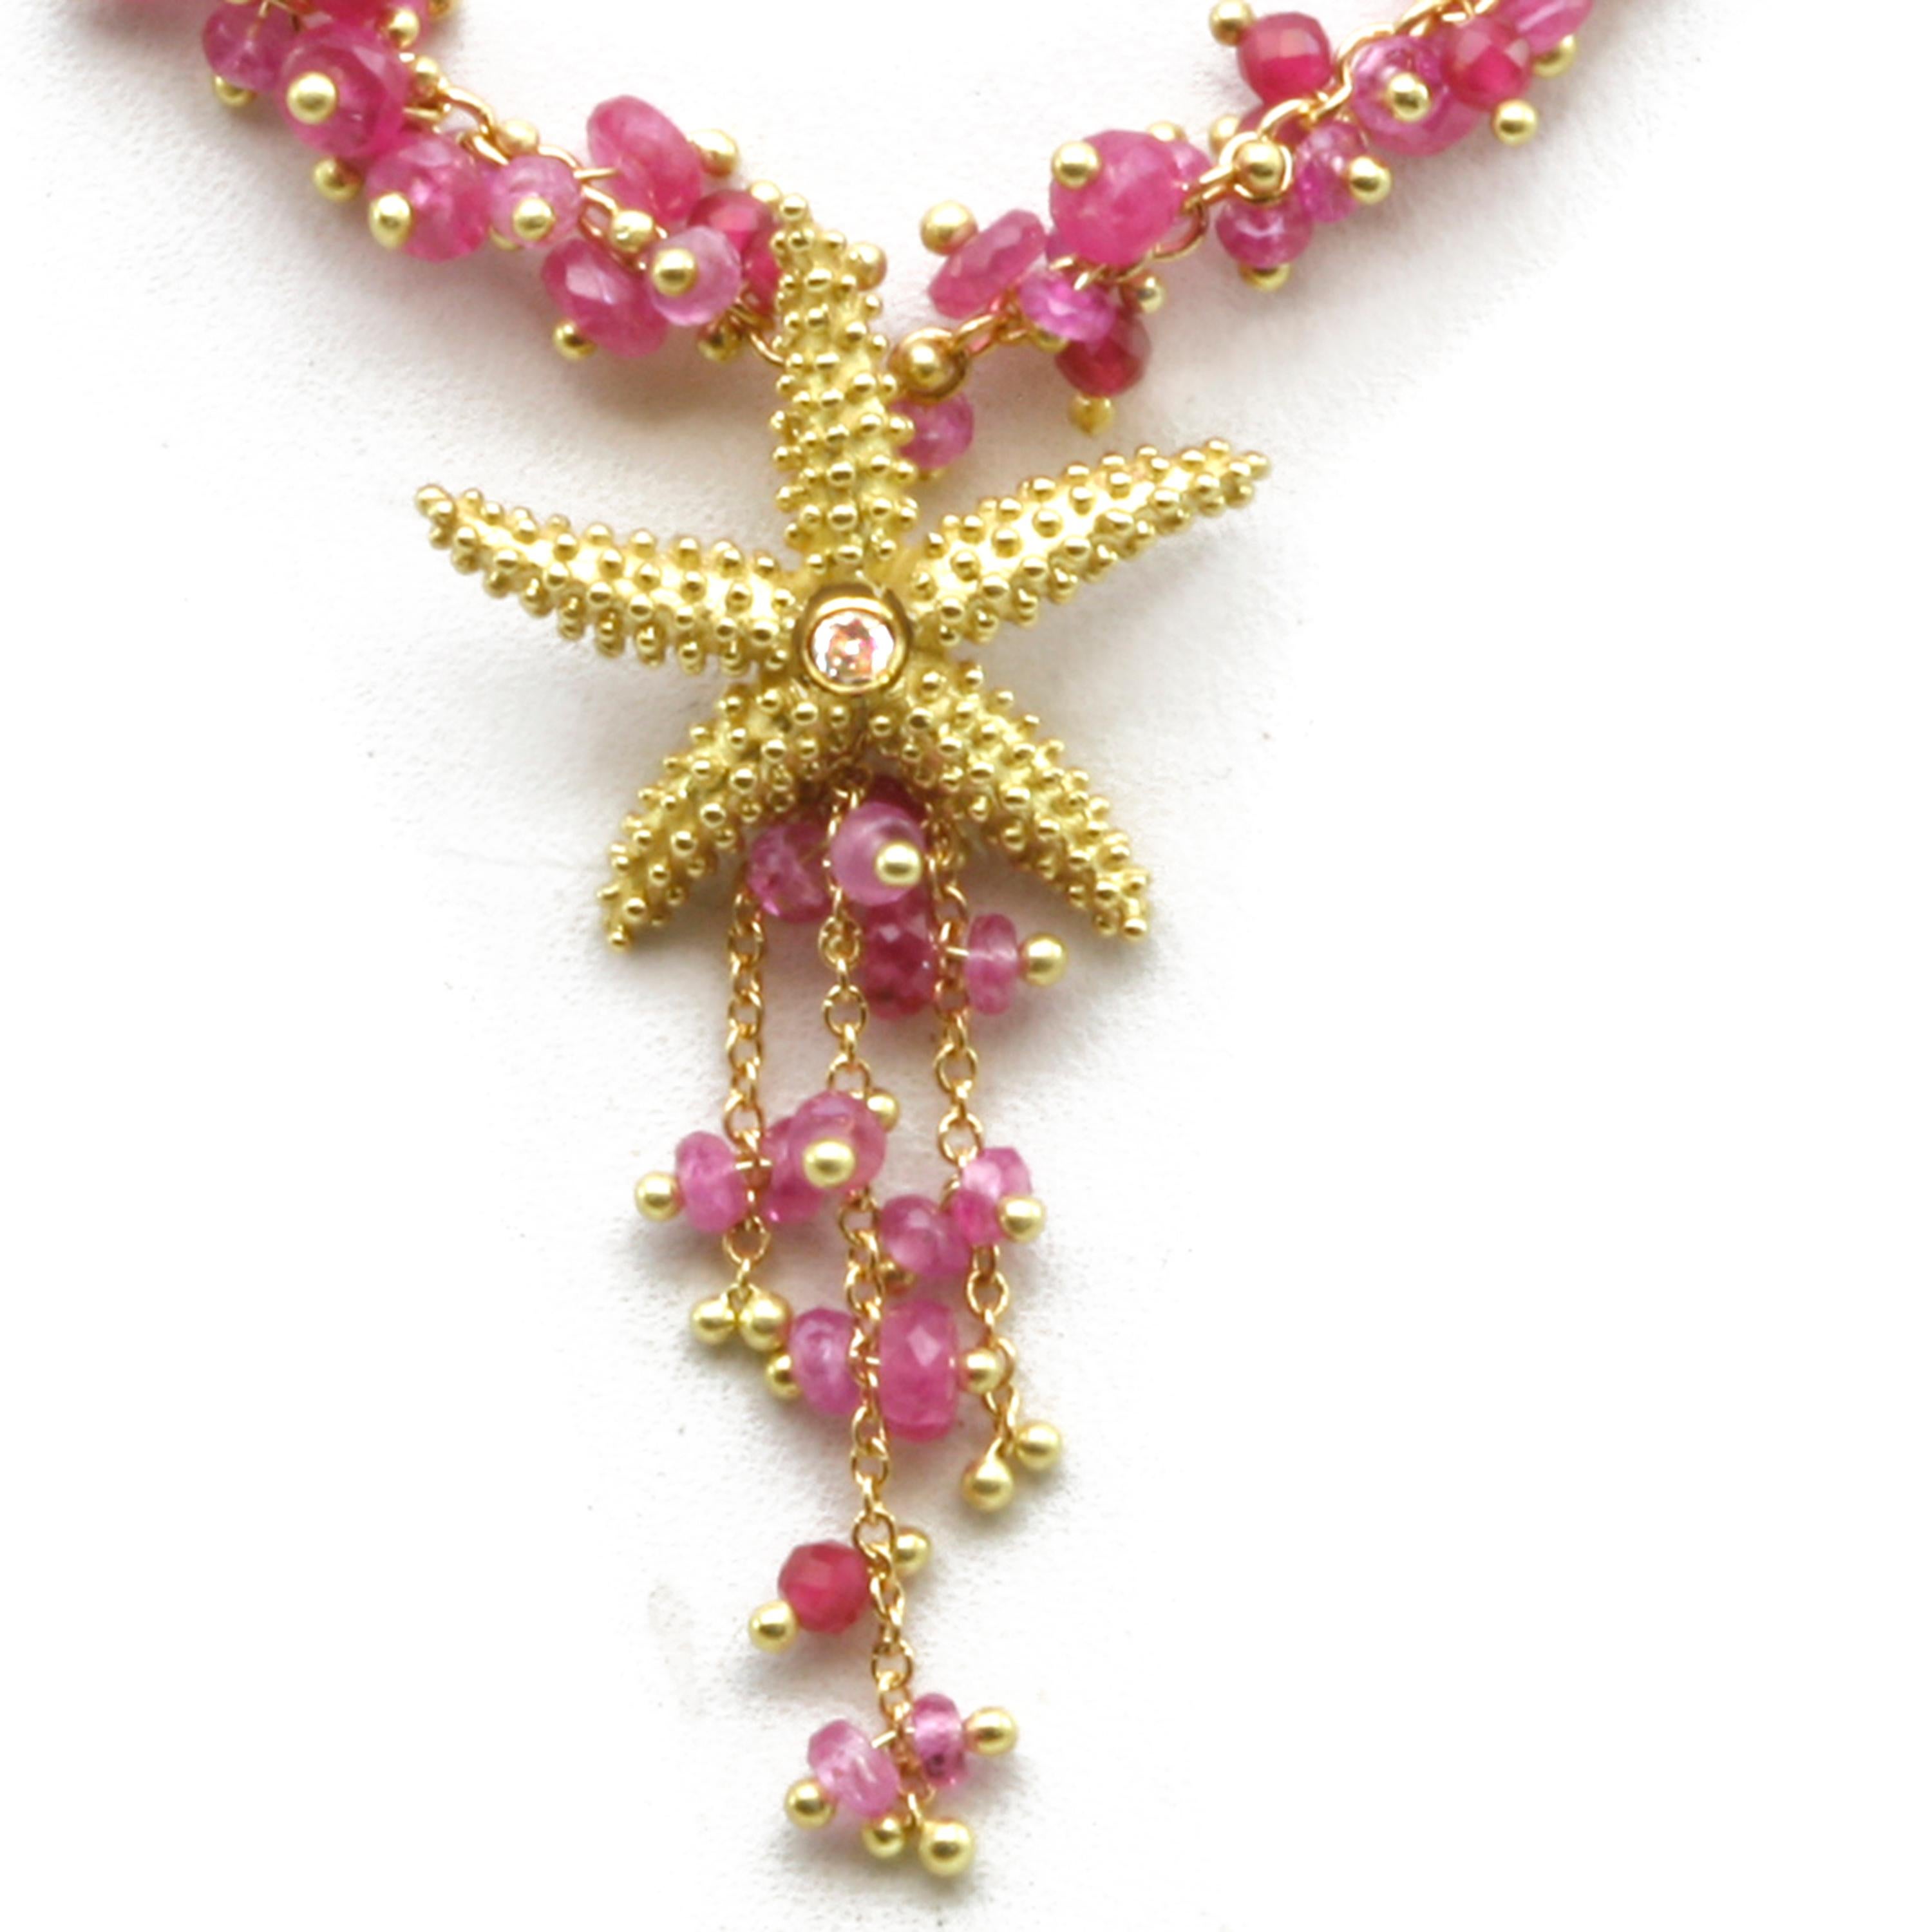 Diana Kim England Seastar Necklace with Pink Sapphire Faceted Beads in 18k Gold In New Condition For Sale In Red Hook, NY